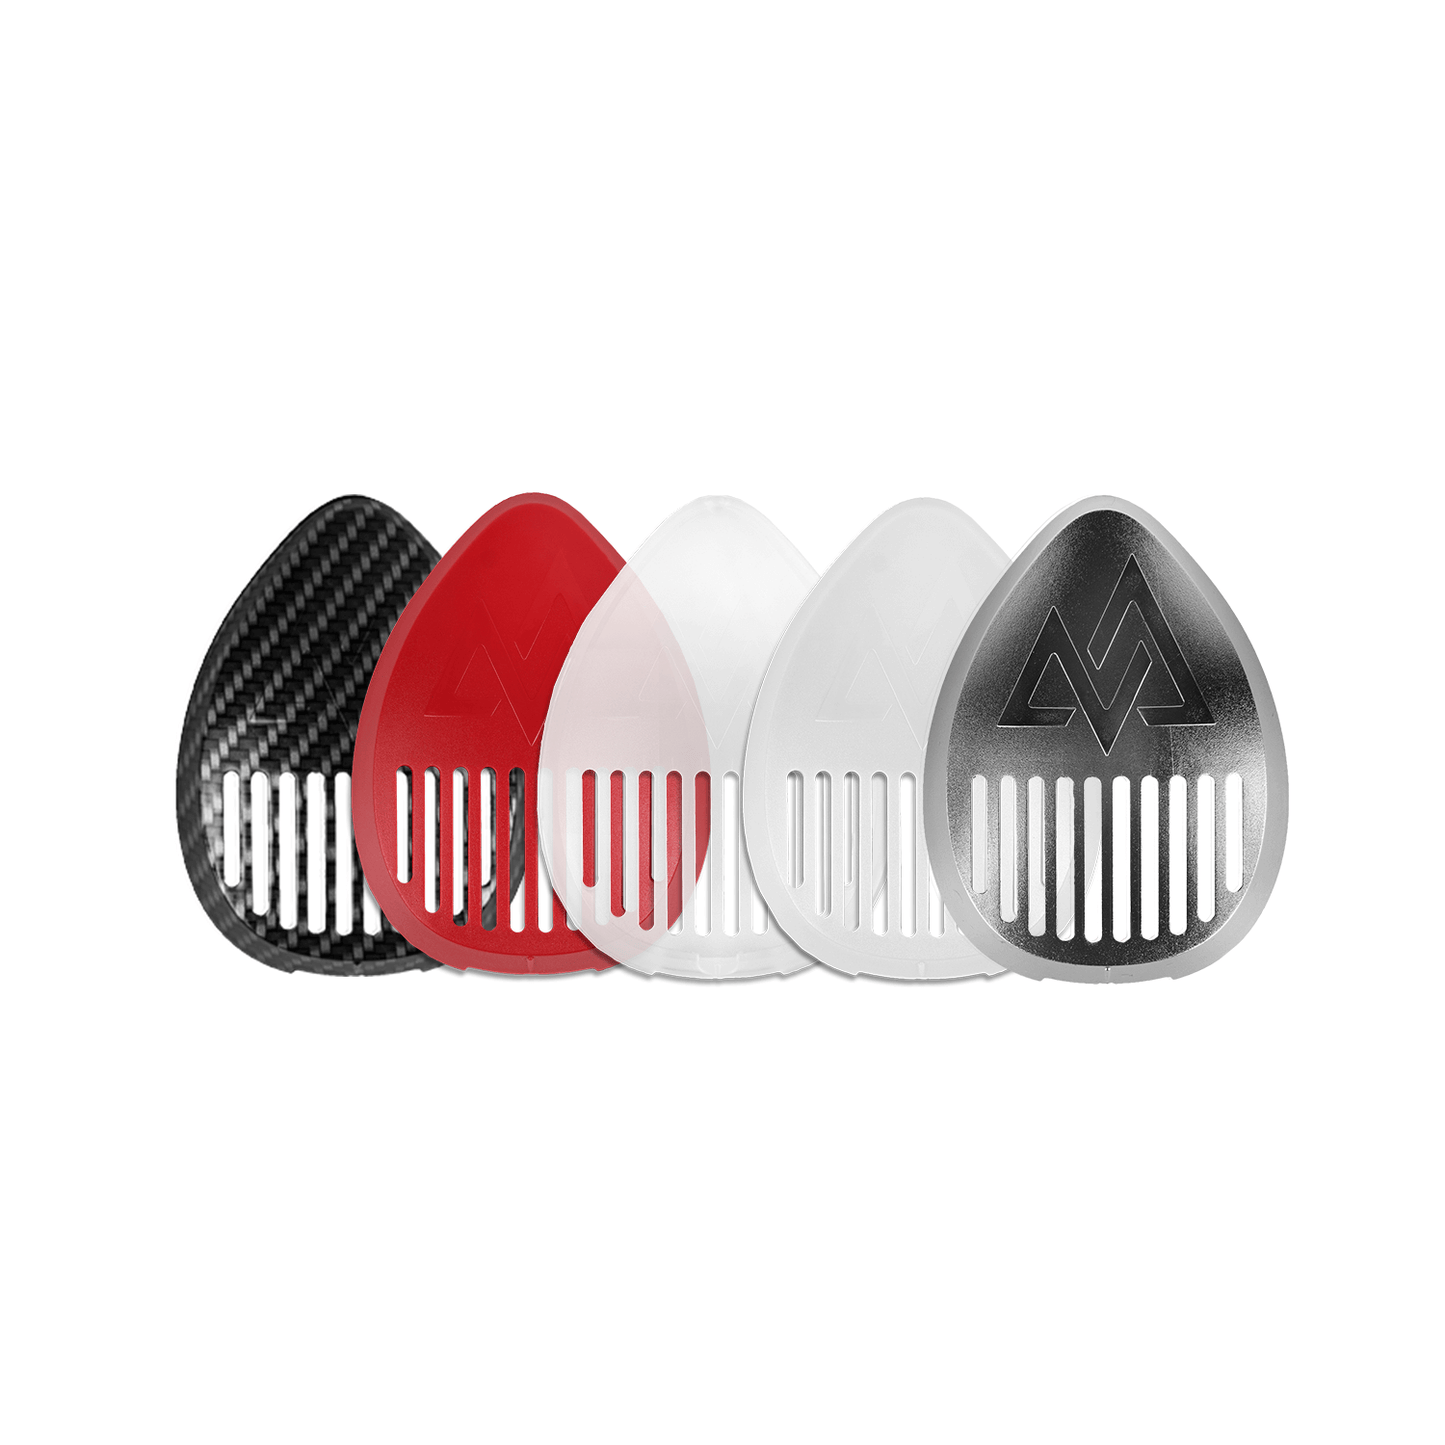 3.0 Accessory Front Clip Bundle-Carbon Fiver, Red, Clear, White, and Platinum Chrome